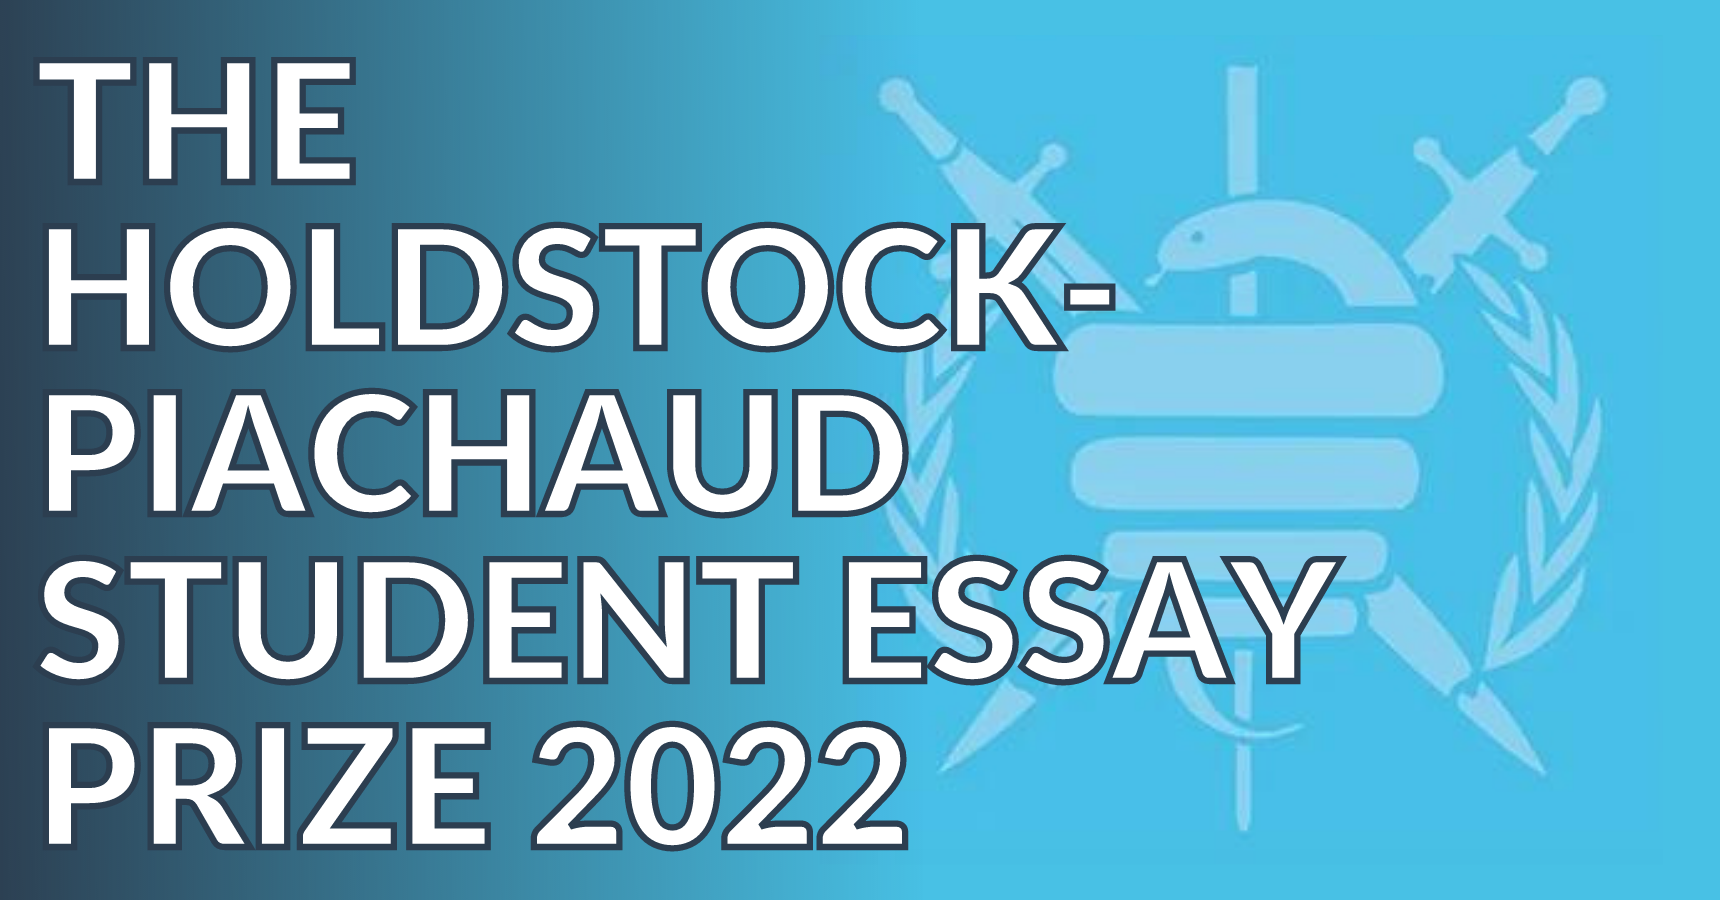 The Holdstock-Piachaud Student Essay Prize